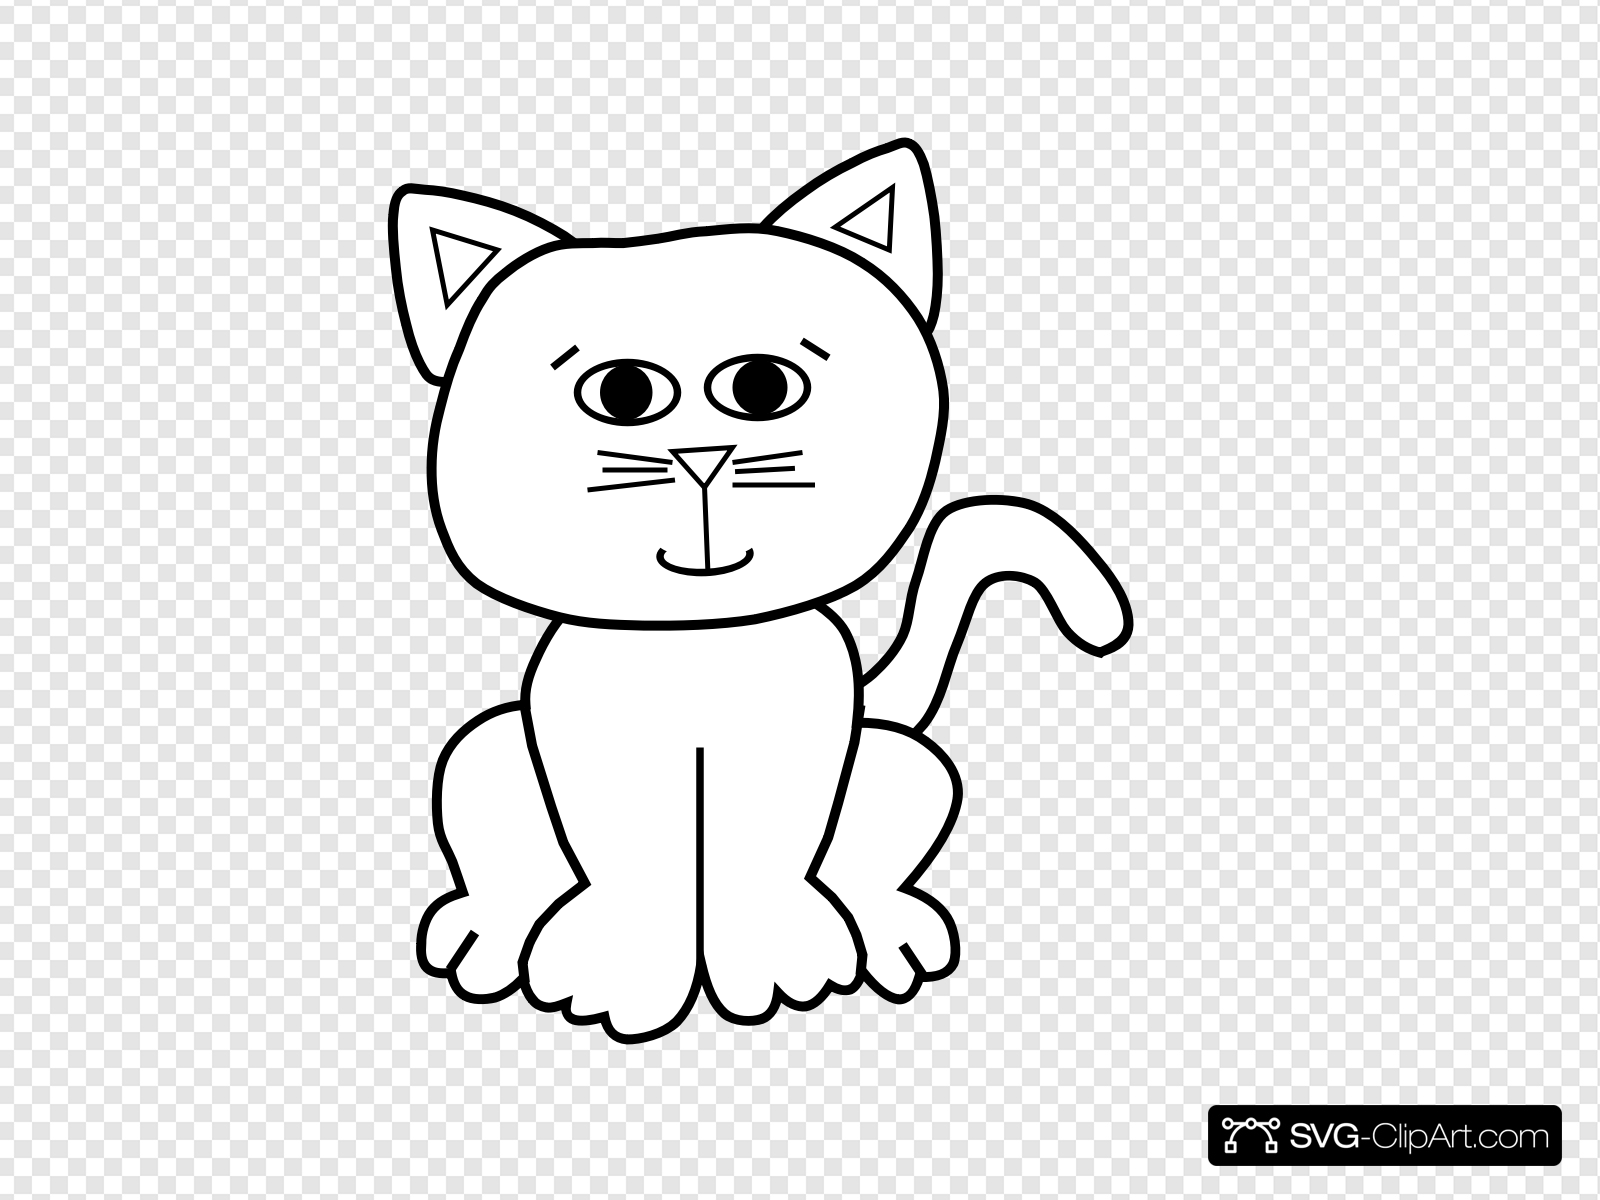 Cat Outline Clip art, Icon and SVG